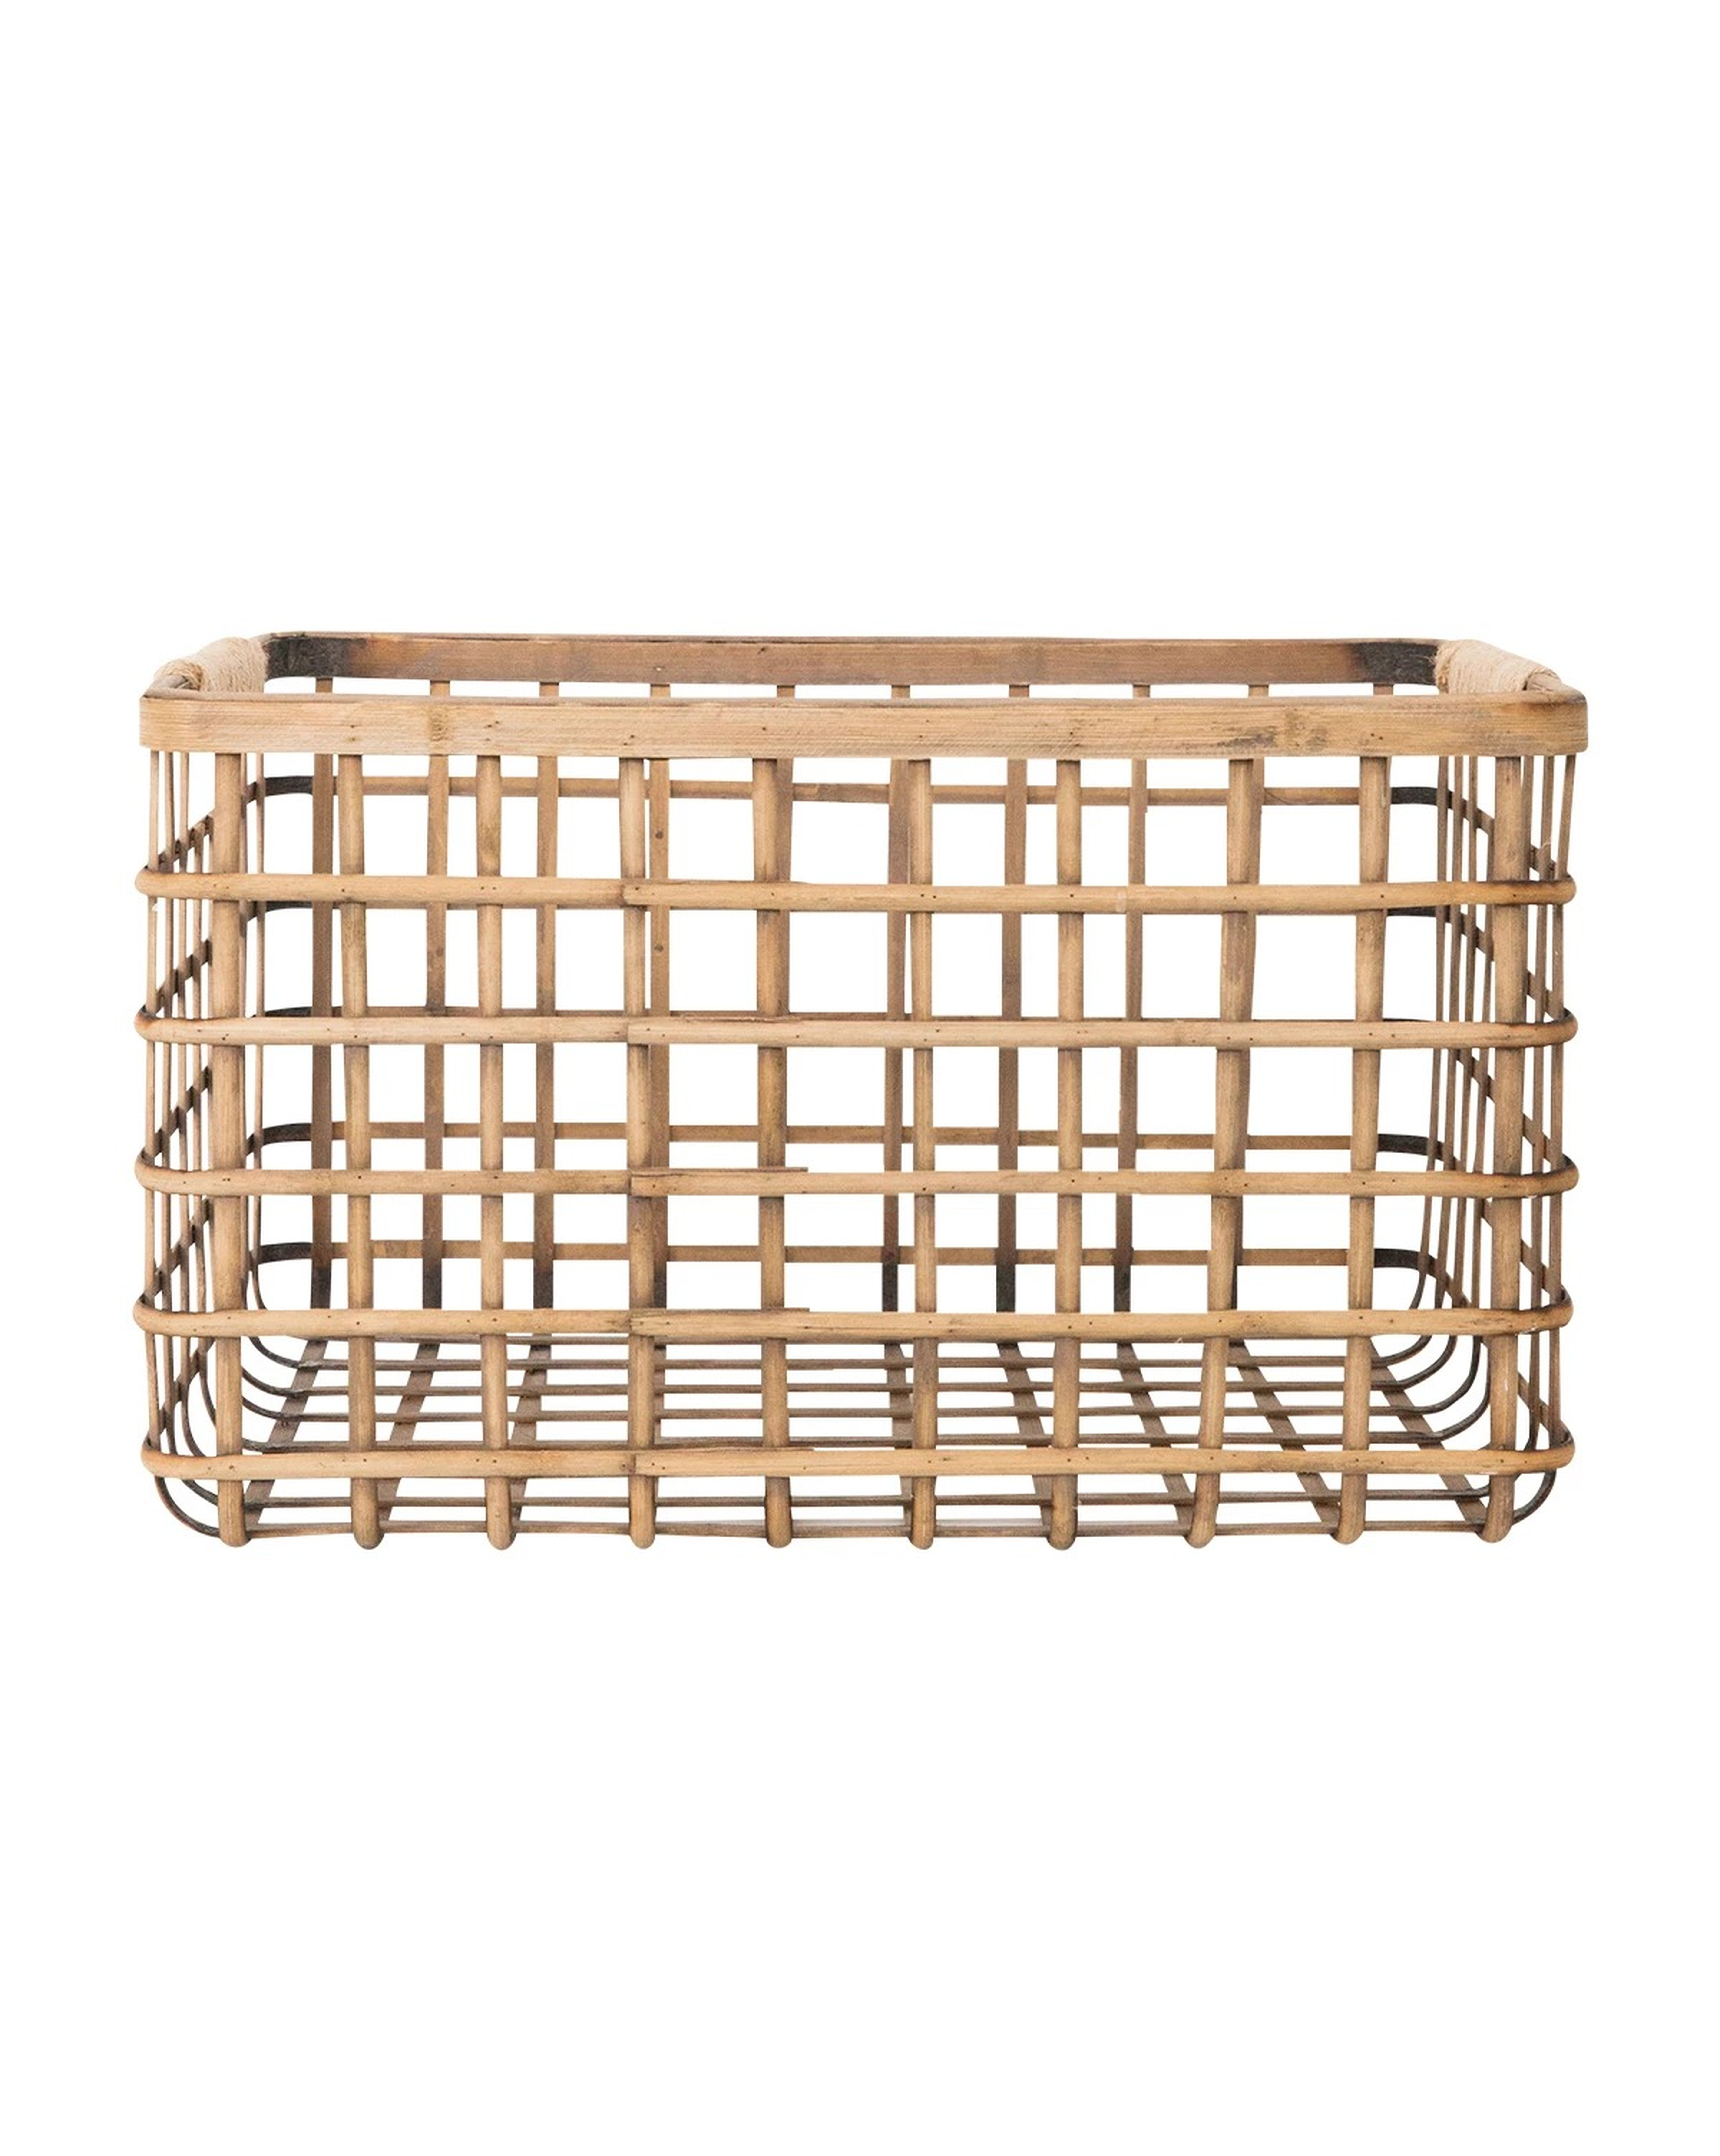 BAMBOO RIVER BASKET, LARGE - McGee & Co.